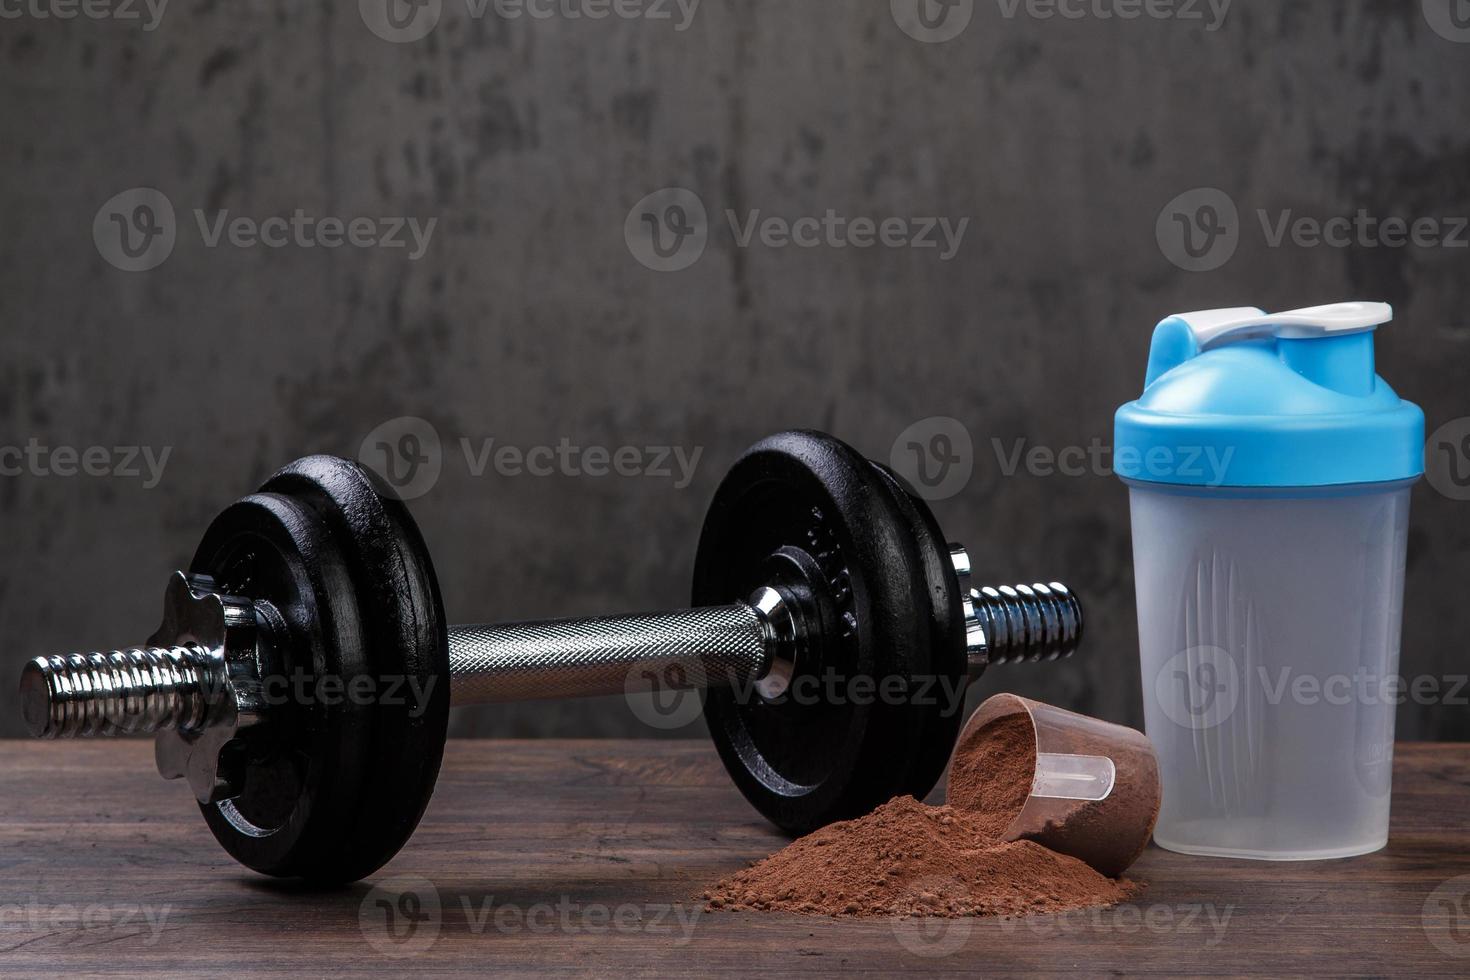 Dumbell and protein powder photo